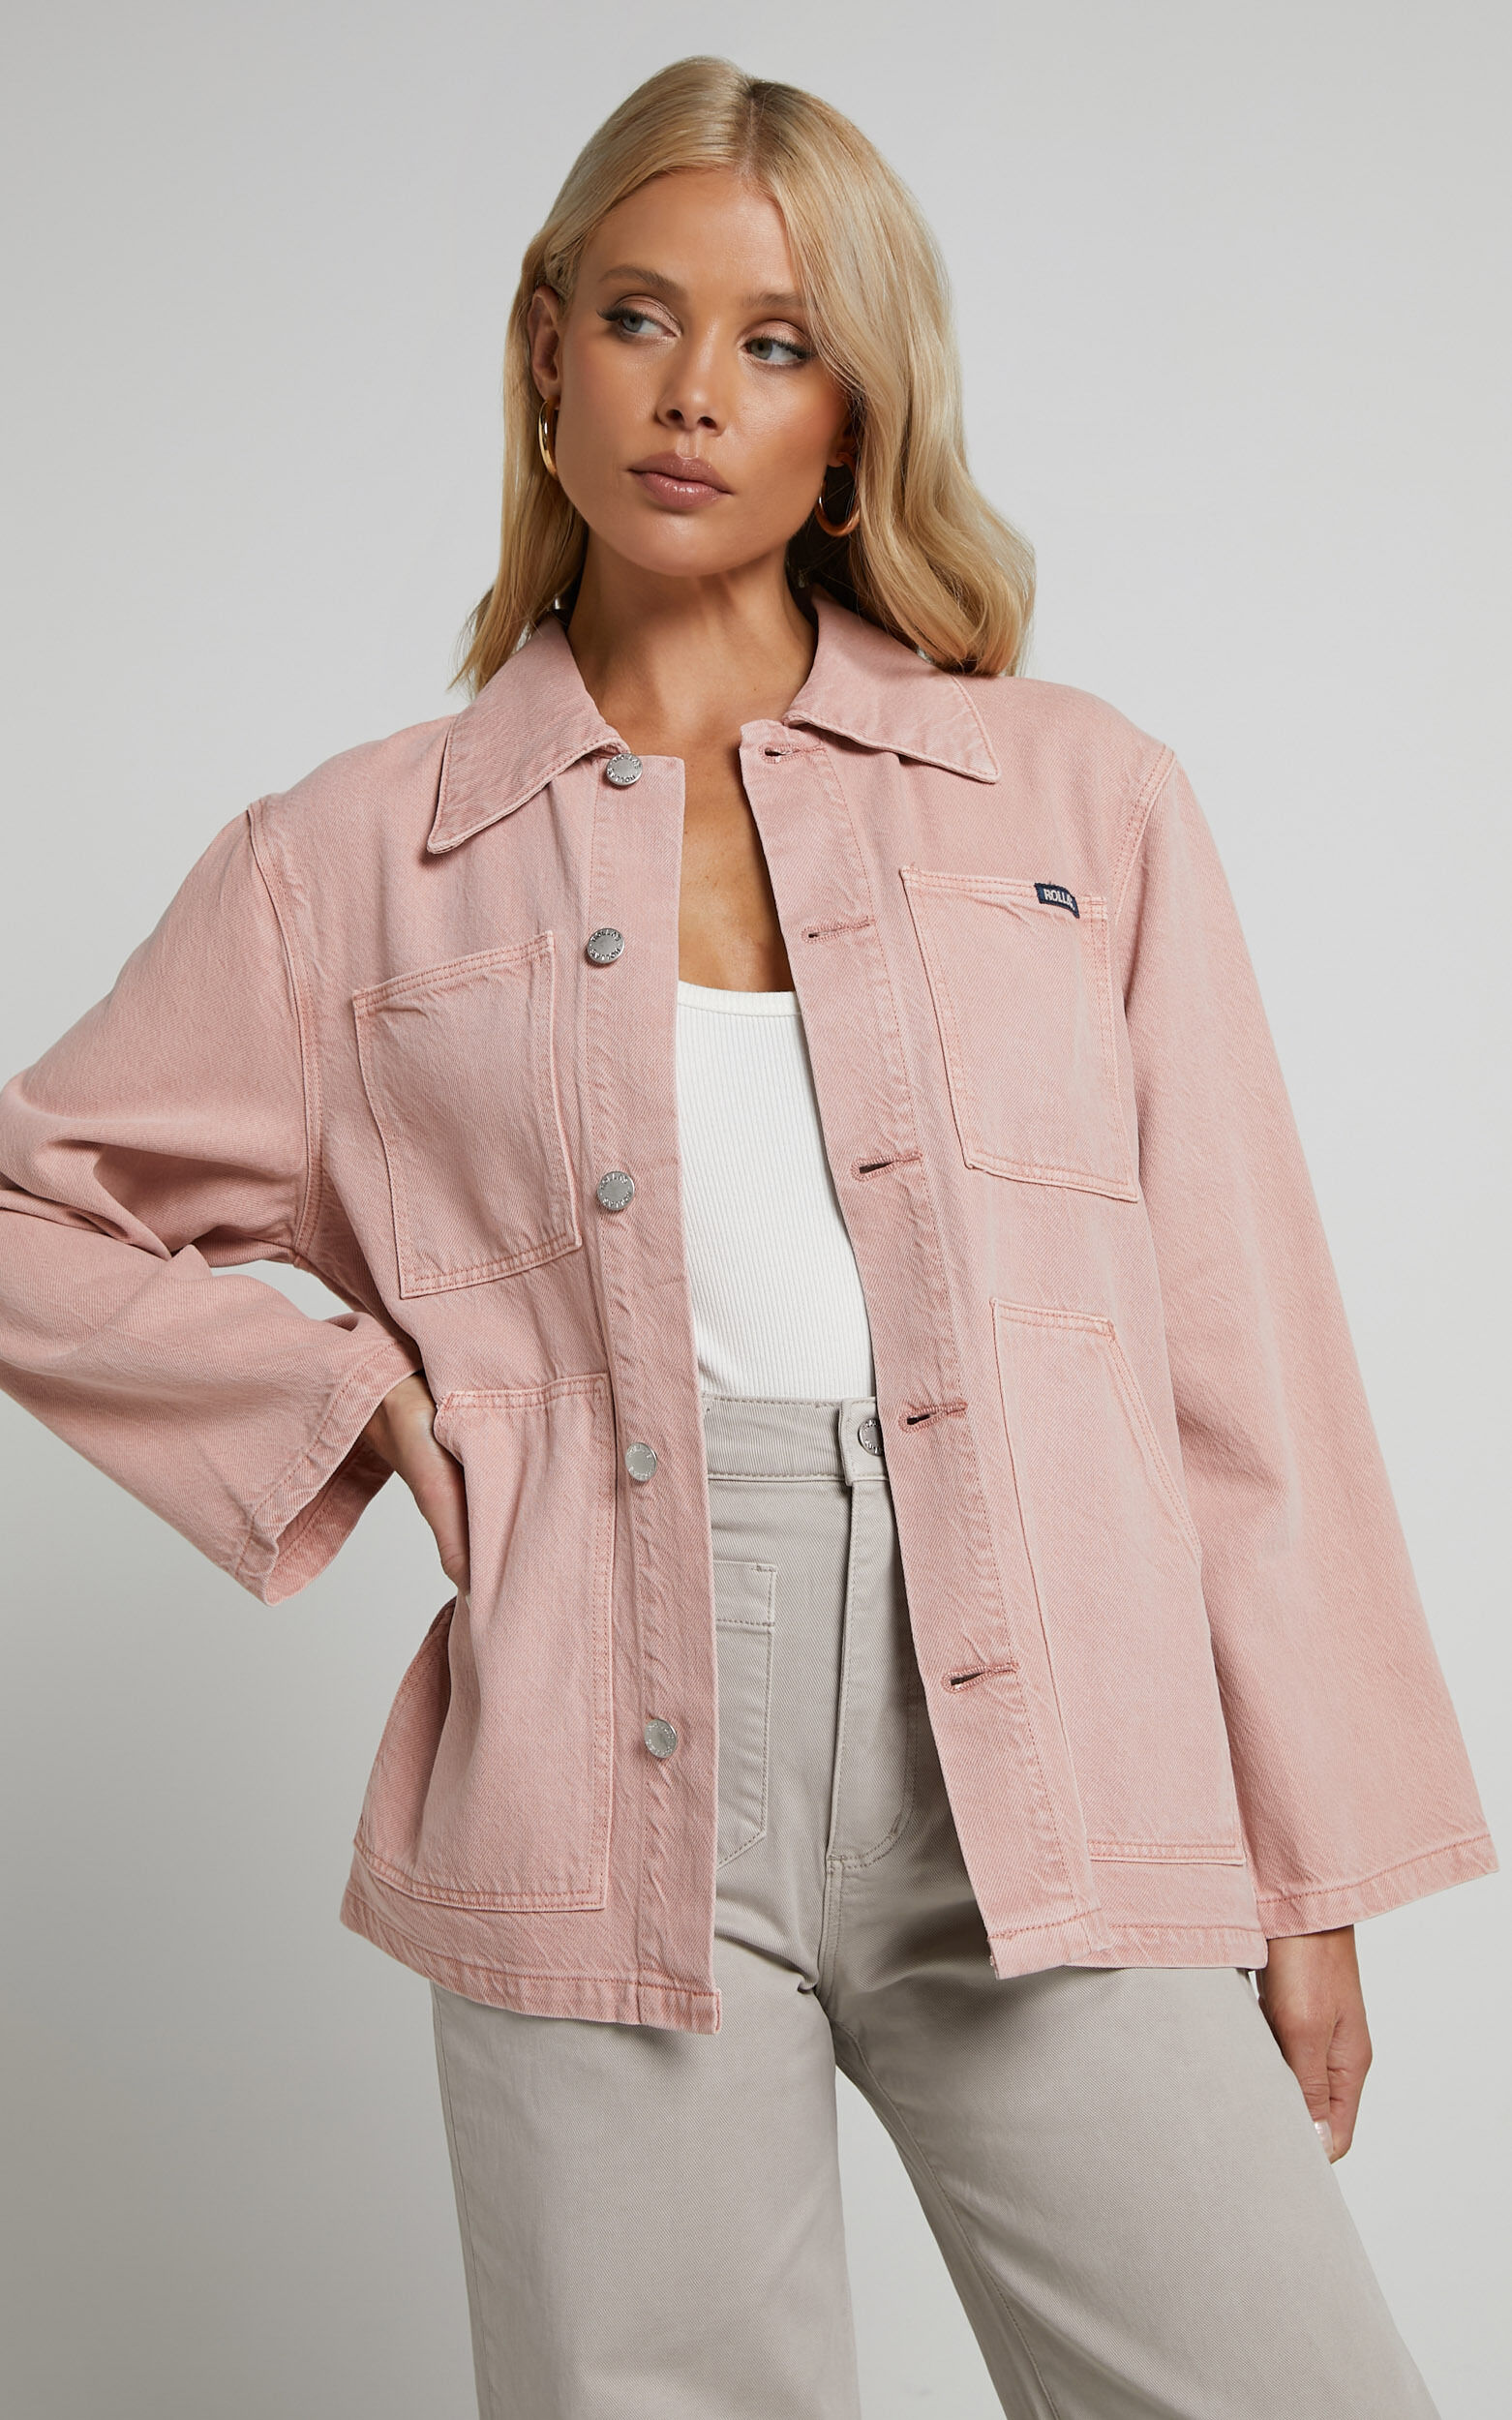 Rolla's - Worker Jacket Lyocell in Peony - L, PNK1, super-hi-res image number null